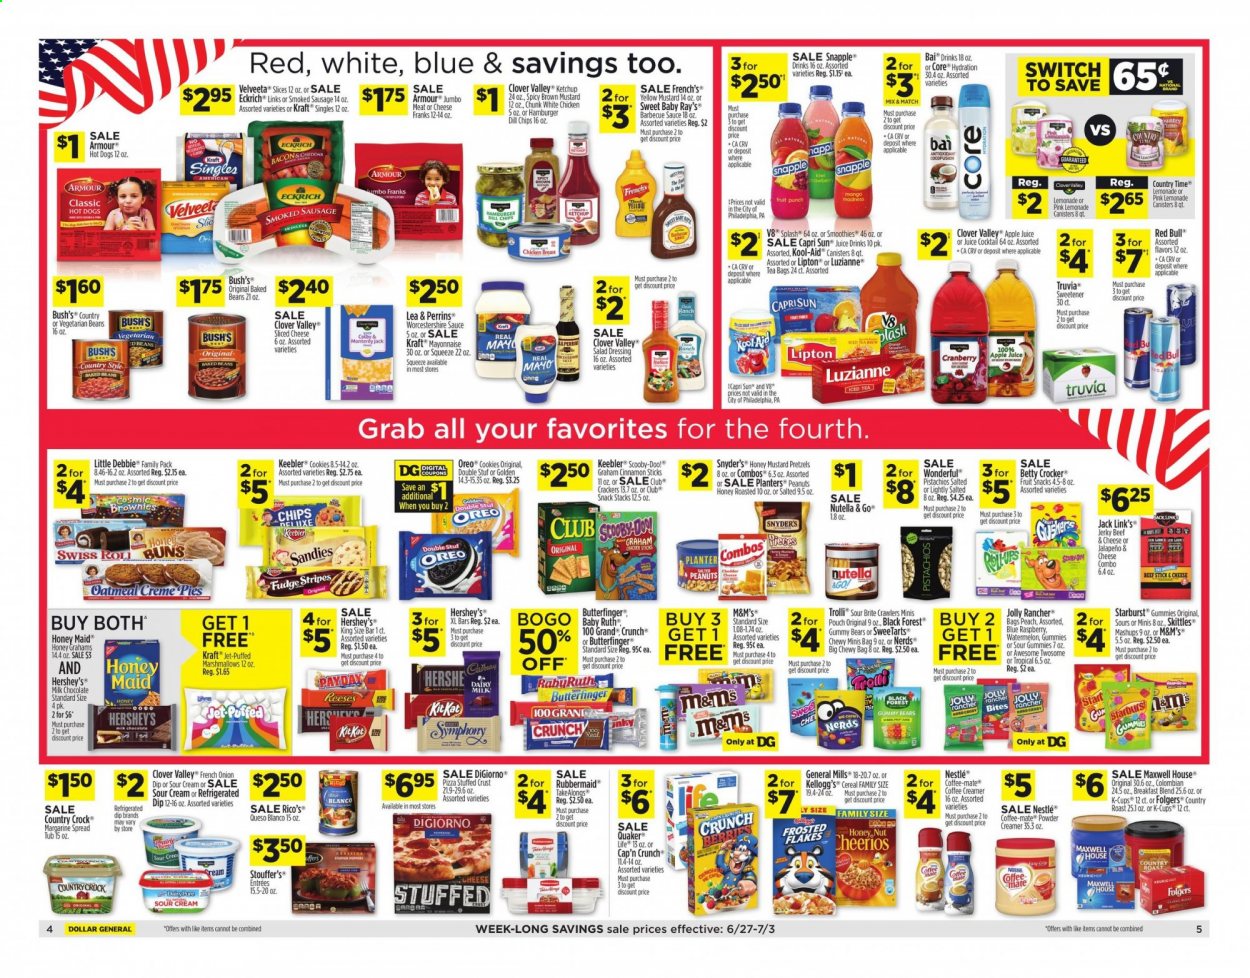 thumbnail - Dollar General Flyer - 06/27/2021 - 07/03/2021 - Sales products - pie, buns, hot dog, pizza, hamburger, sauce, Quaker, Kraft®, jerky, sausage, smoked sausage, Oreo, Clover, Coffee-Mate, margarine, sour cream, creamer, mayonnaise, dip, Reese's, Hershey's, Stouffer's, cookies, fudge, Nestlé, Nutella, chocolate, Trolli, M&M's, crackers, Kellogg's, Skittles, fruit snack, Keebler, Starburst, chips, Jack Link's, oatmeal, cereals, Cheerios, Cap'n Crunch, Frosted Flakes, Honey Maid, cinnamon, BBQ sauce, mustard, salad dressing, worcestershire sauce, honey mustard, ketchup, dressing, peanuts, Planters, Capri Sun, lemonade, Lipton, Red Bull, Snapple, Bai, Country Time, Folgers, coffee capsules, K-Cups, Jet, Brite, switch. Page 3.